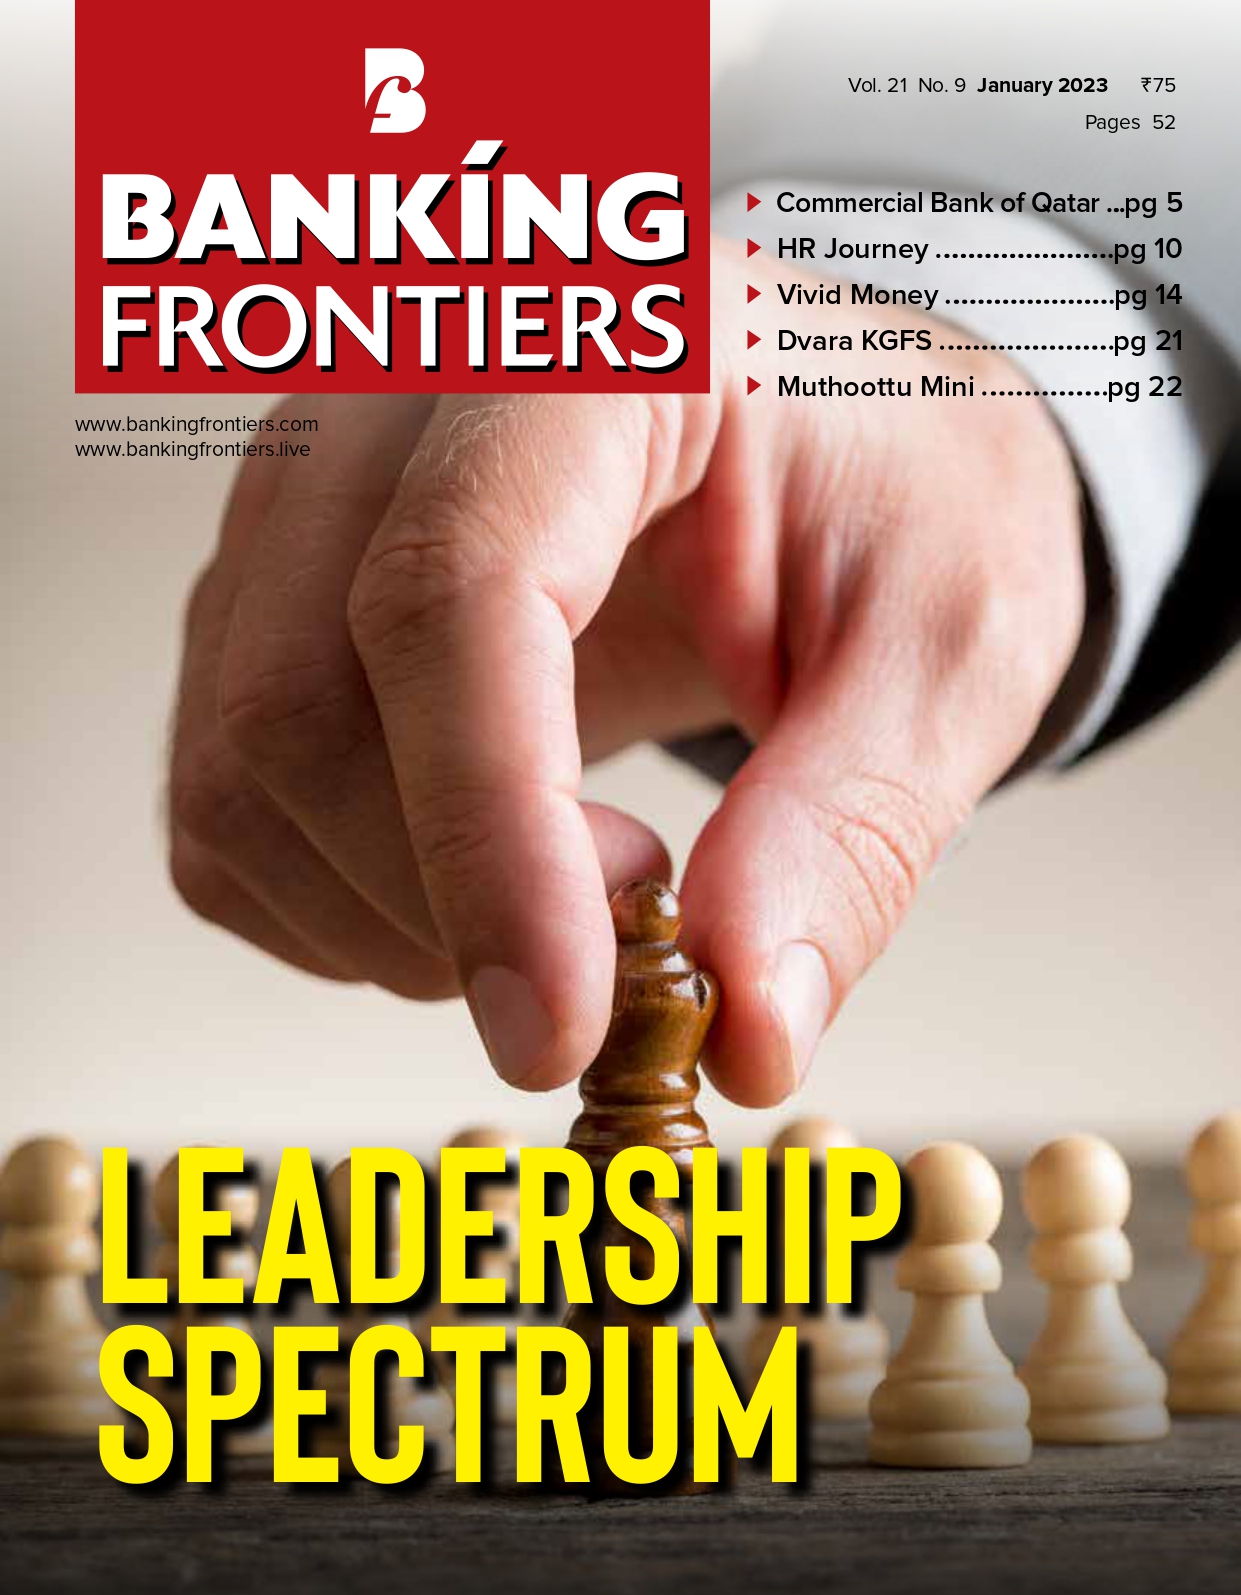 Banking Frontiers January 2023 Issue-leadership Spectrum